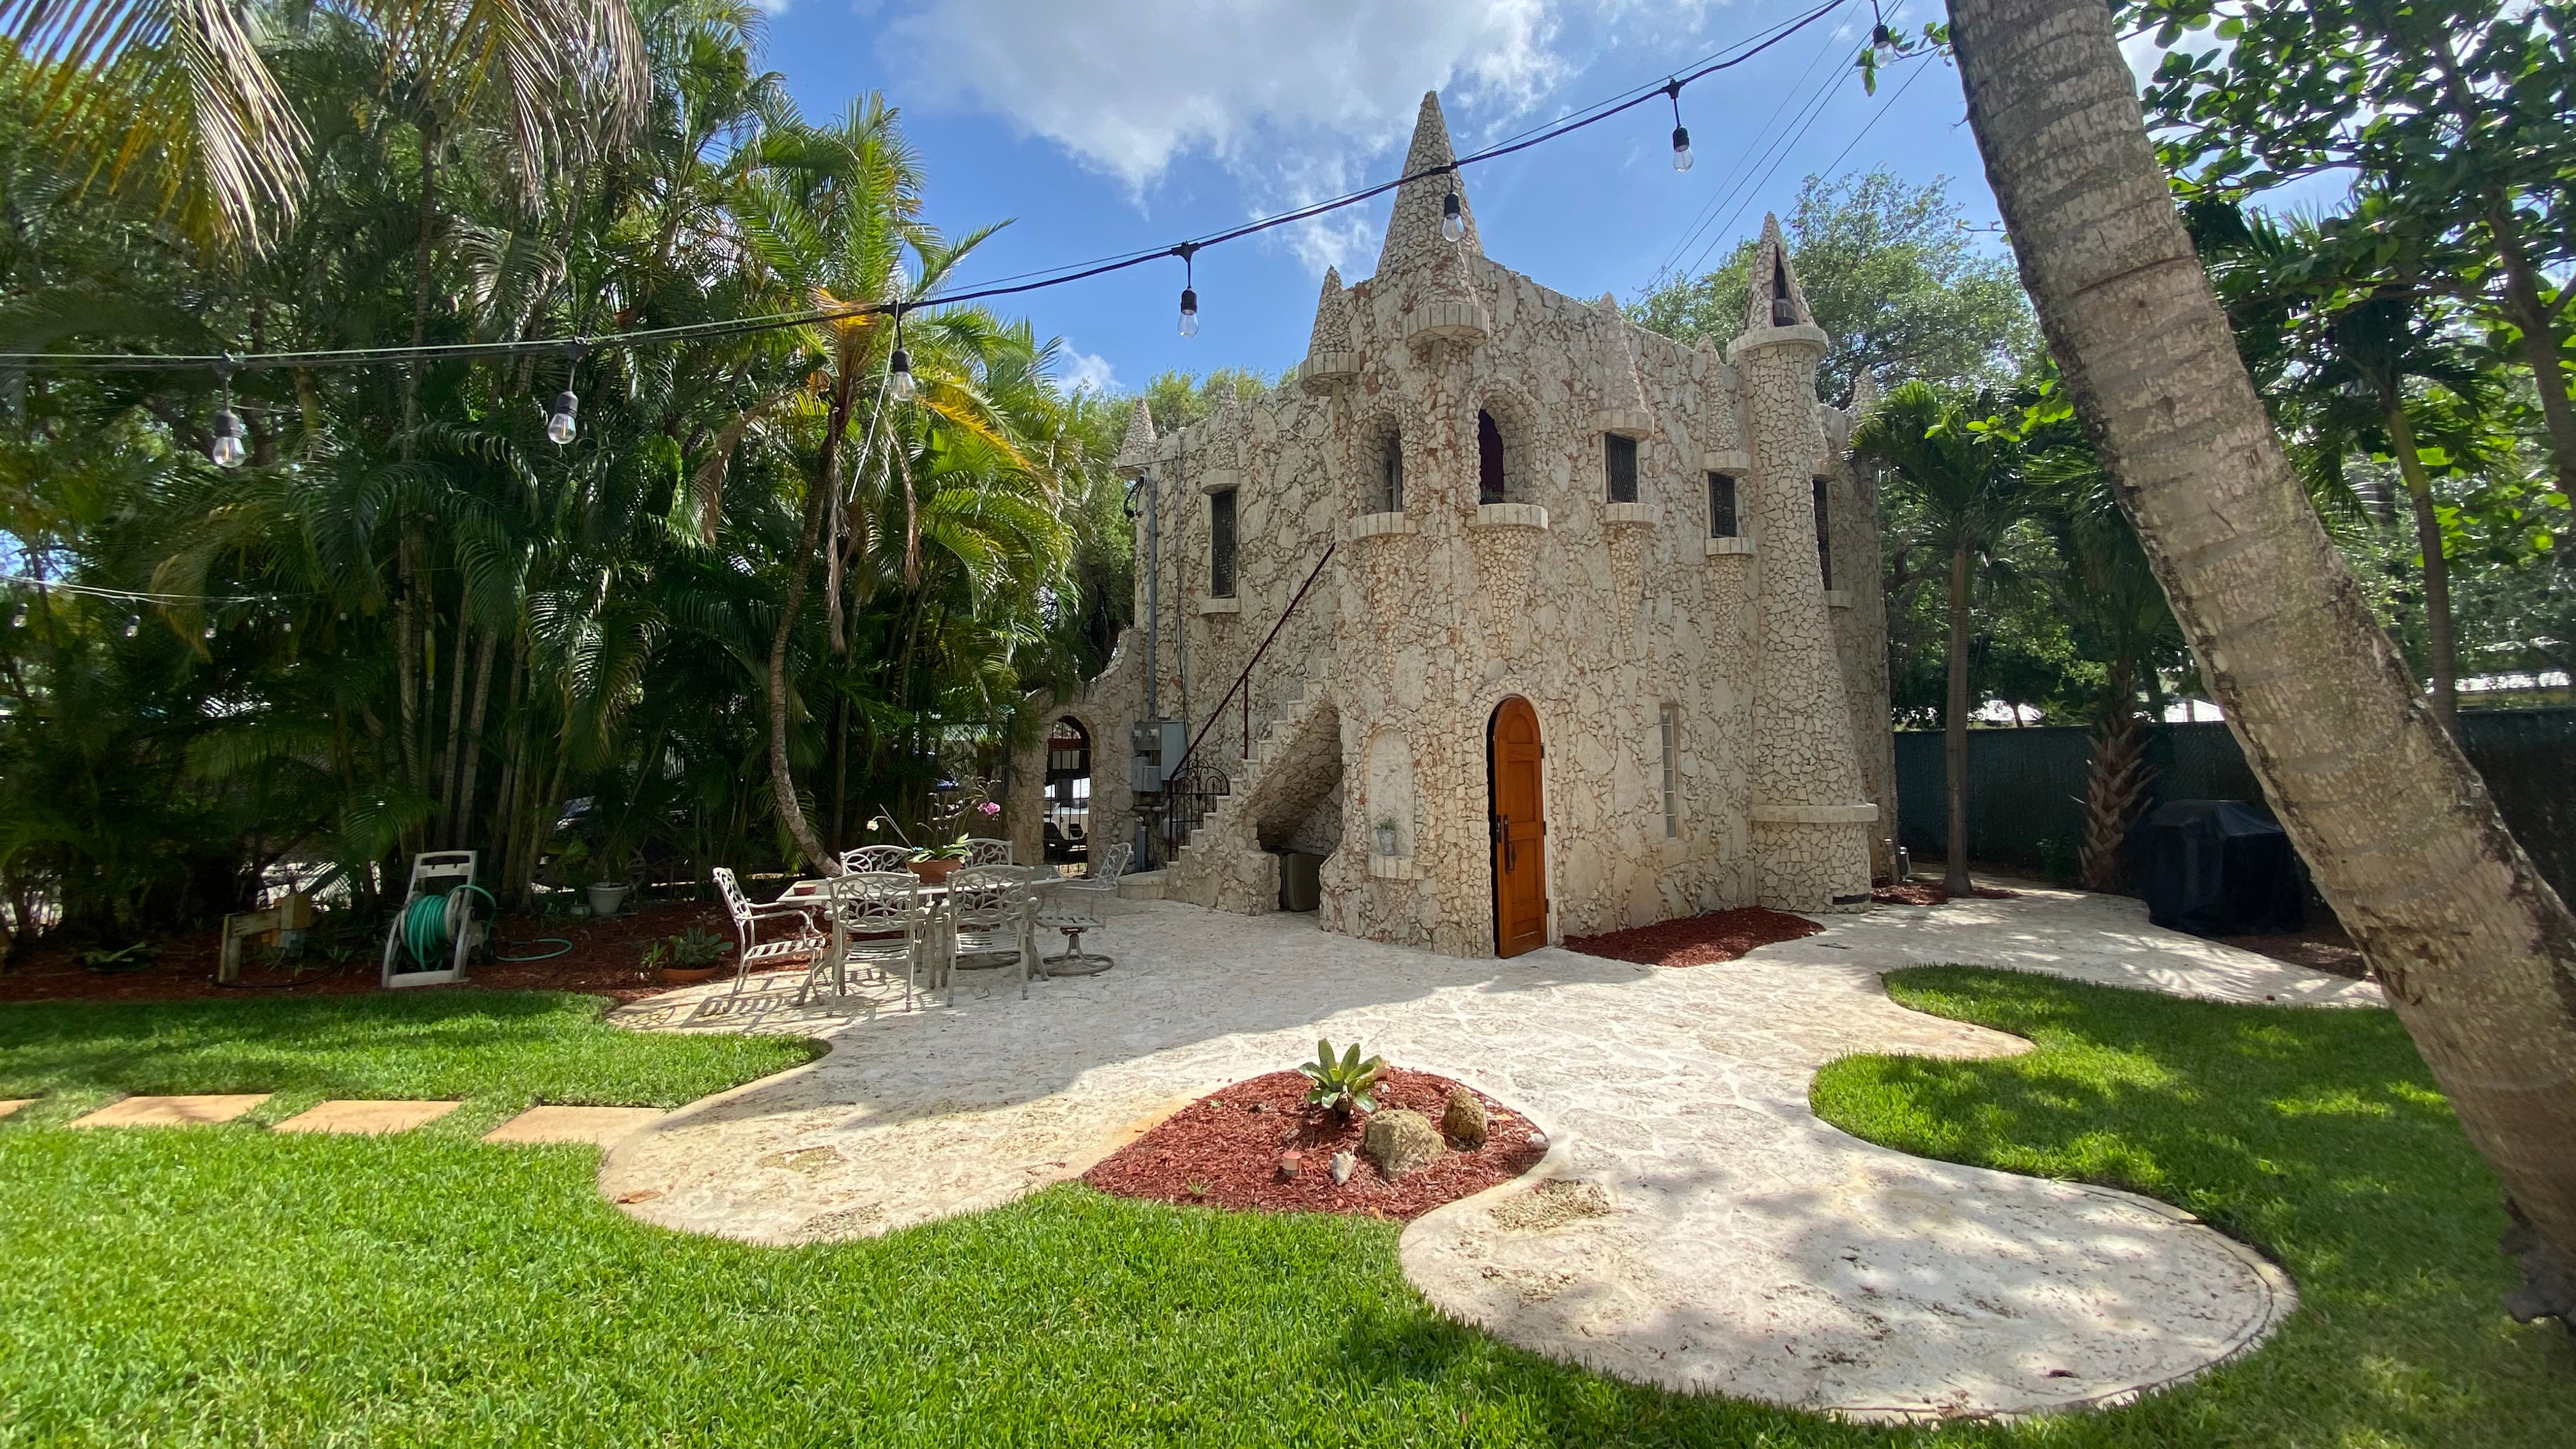 Miniature castle in Florida hits market for $1.75 million